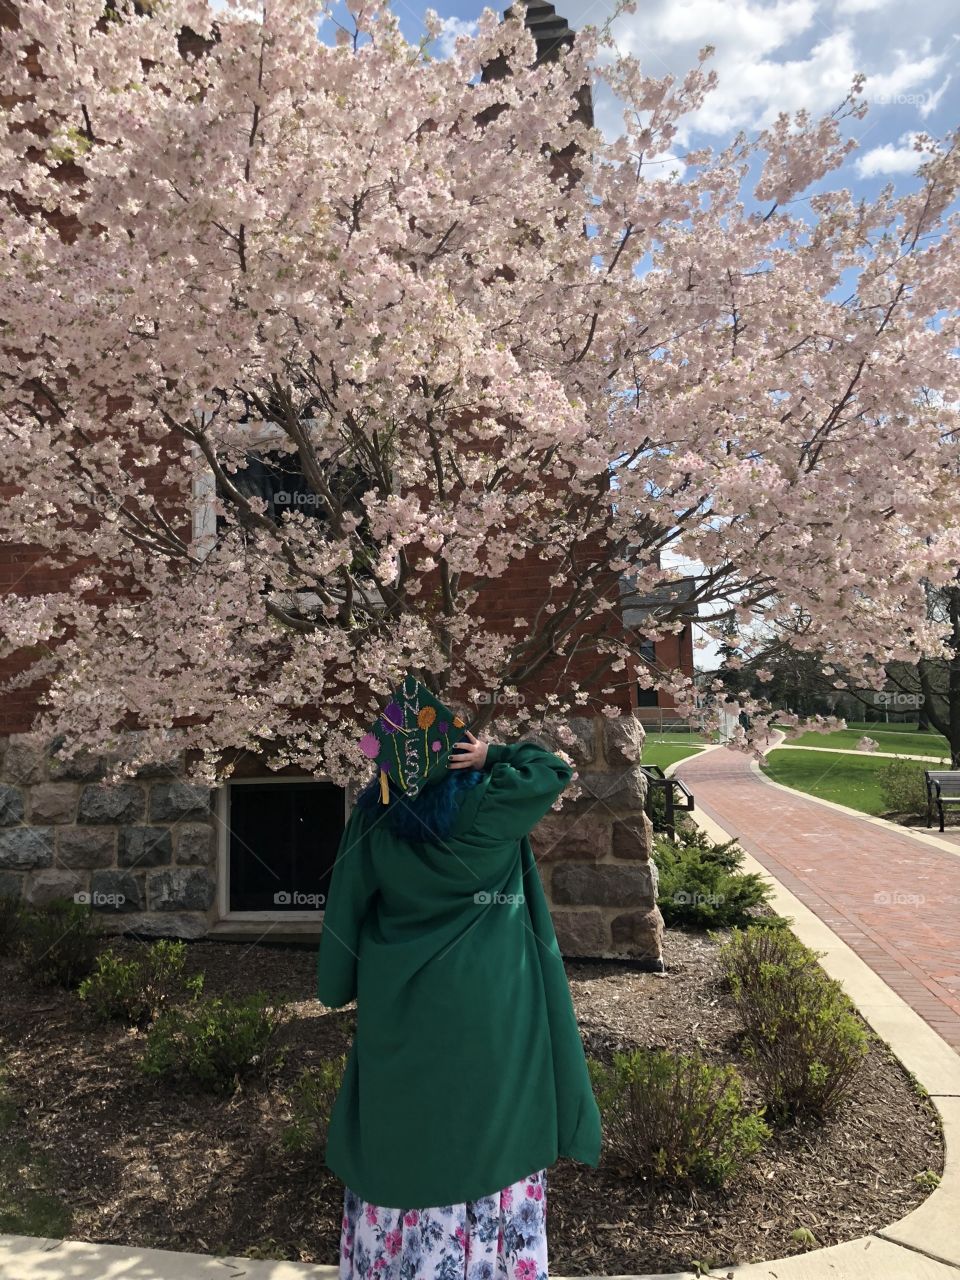 College Graduate in cap and gown looking up at a tree in full bloom at Michigan State University